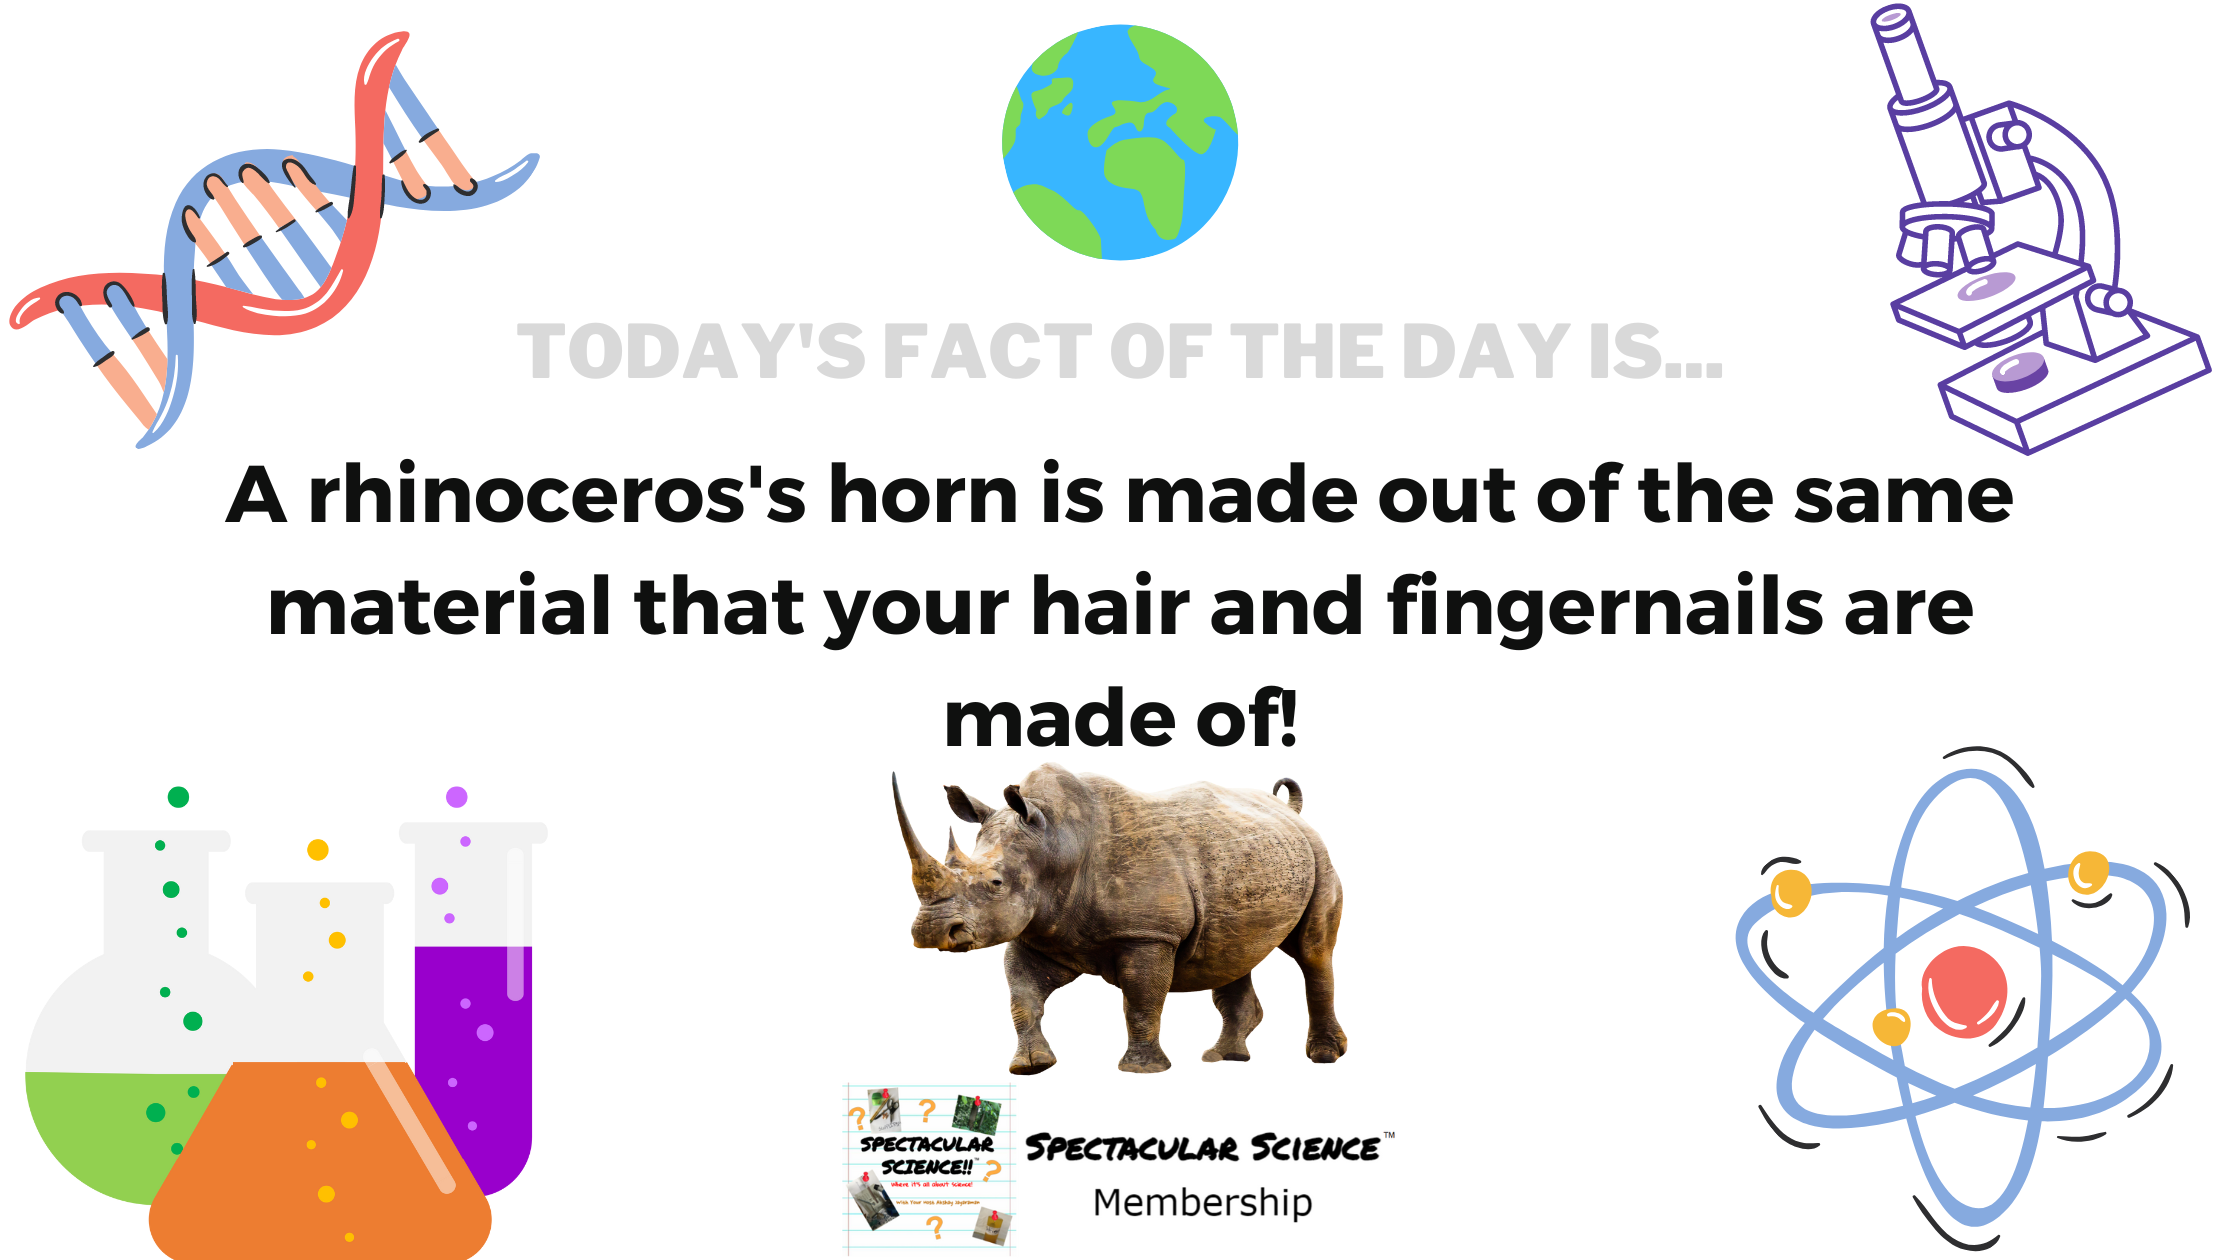 Fact of the Day Image October 31st